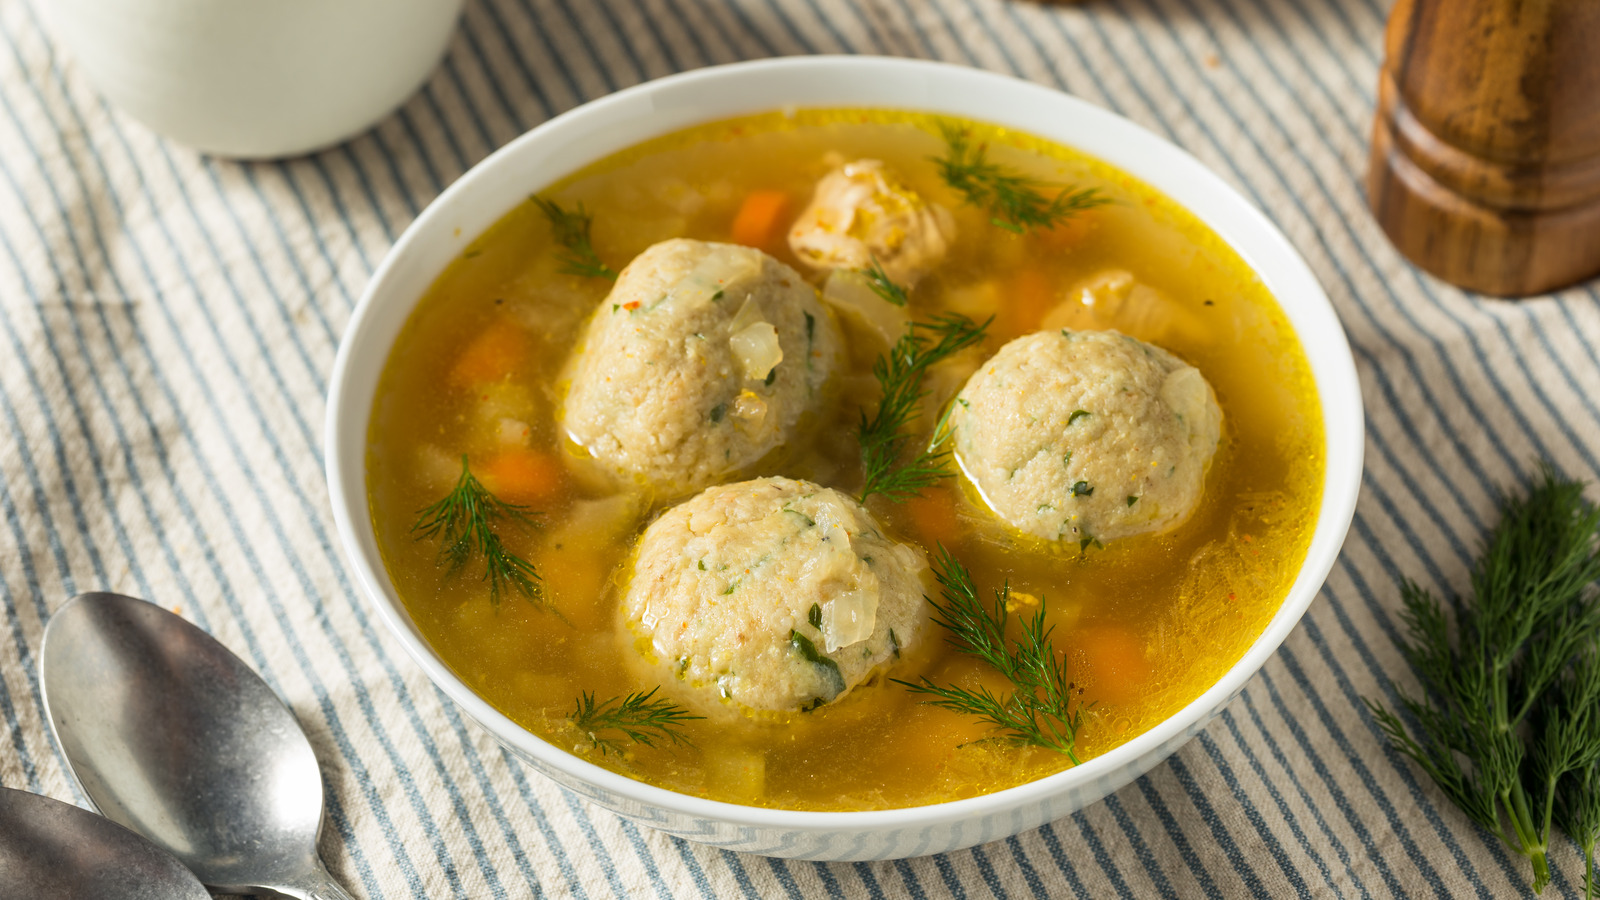 https://www.tastingtable.com/img/gallery/jake-cohens-tips-for-perfectly-fluffy-matzo-balls-exclusive/l-intro-1697829343.jpg